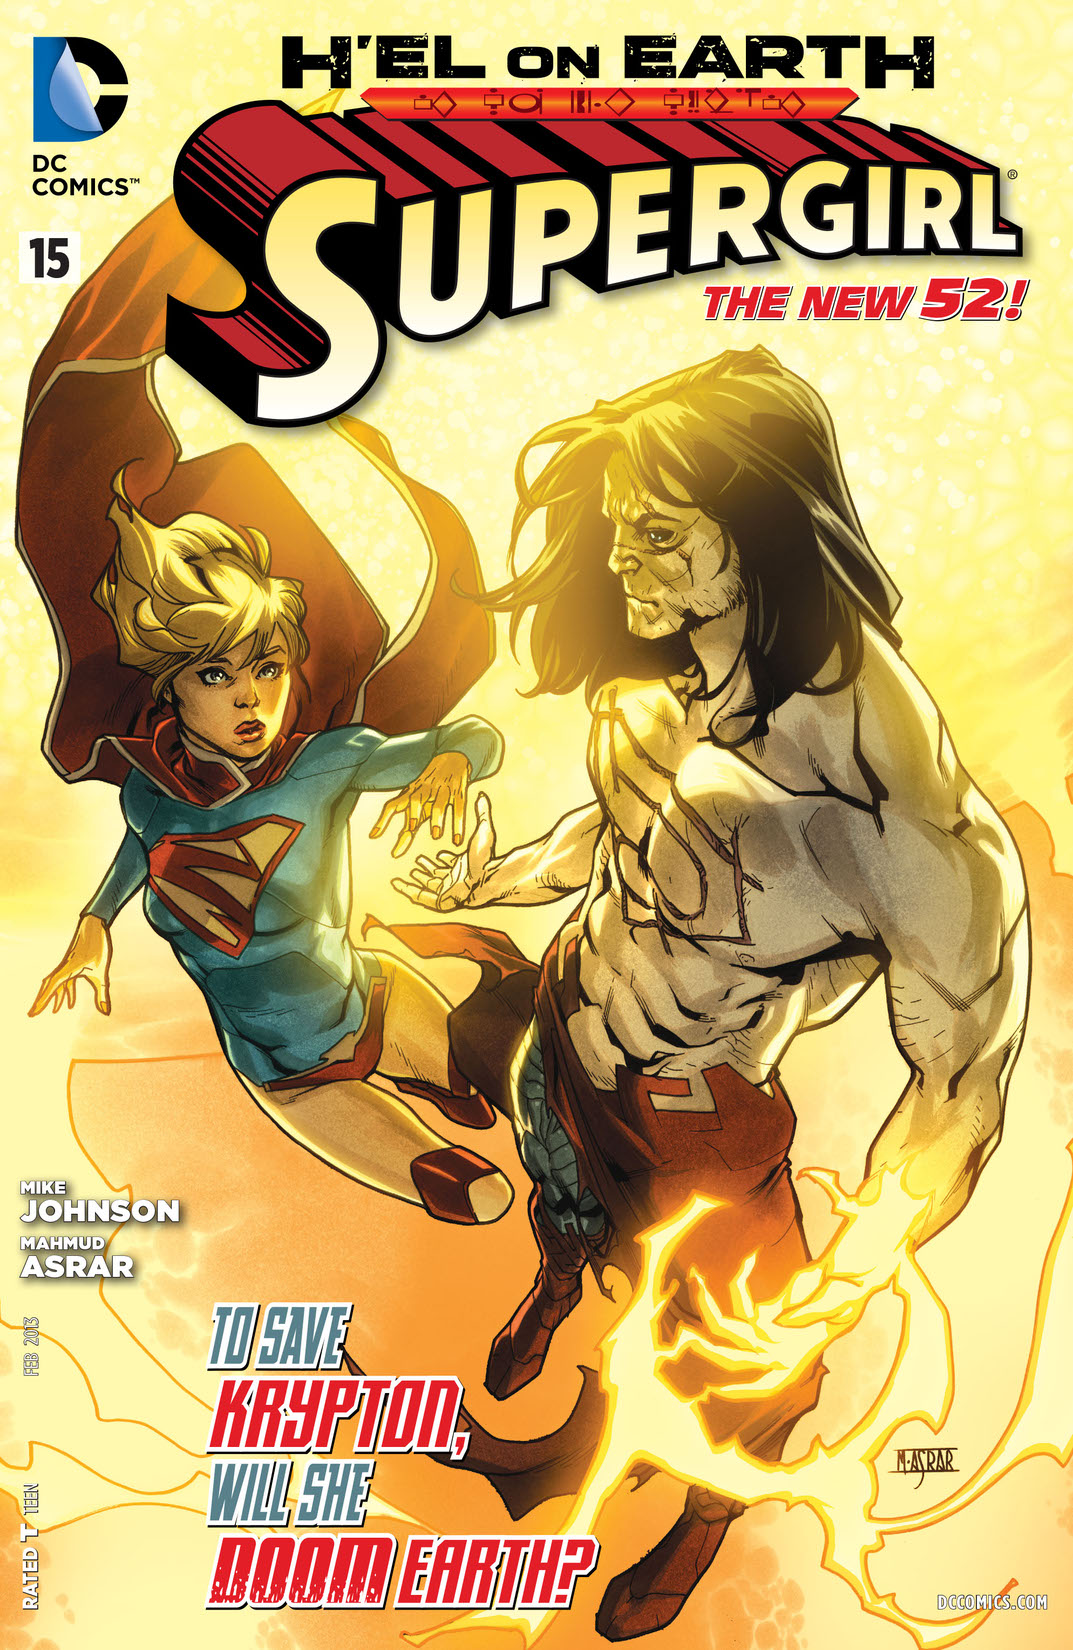 Supergirl (2011-) #15 preview images